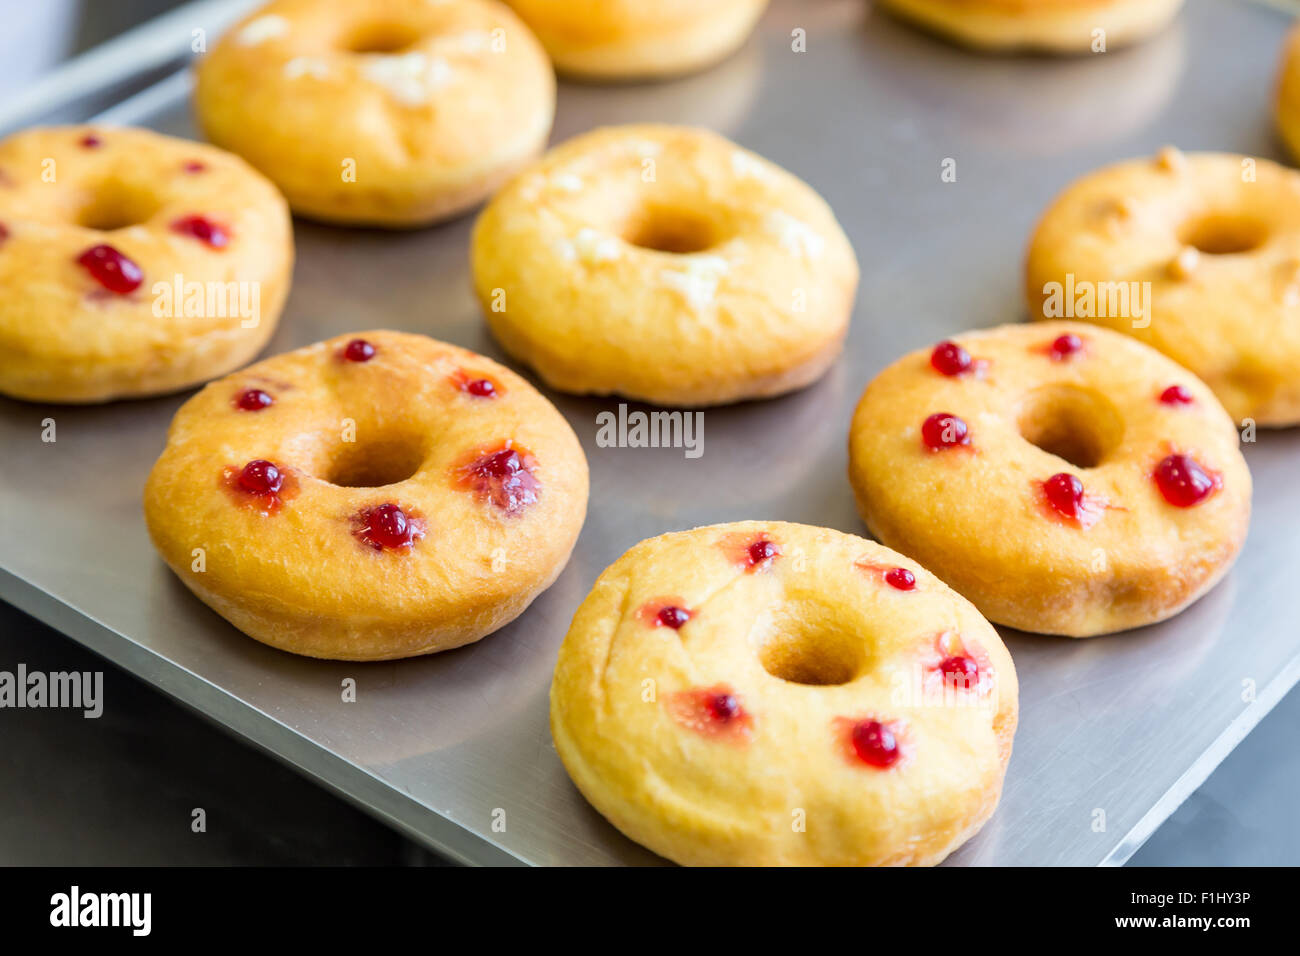 bakery doughnuts with assorted filling on metal tray Stock Photo